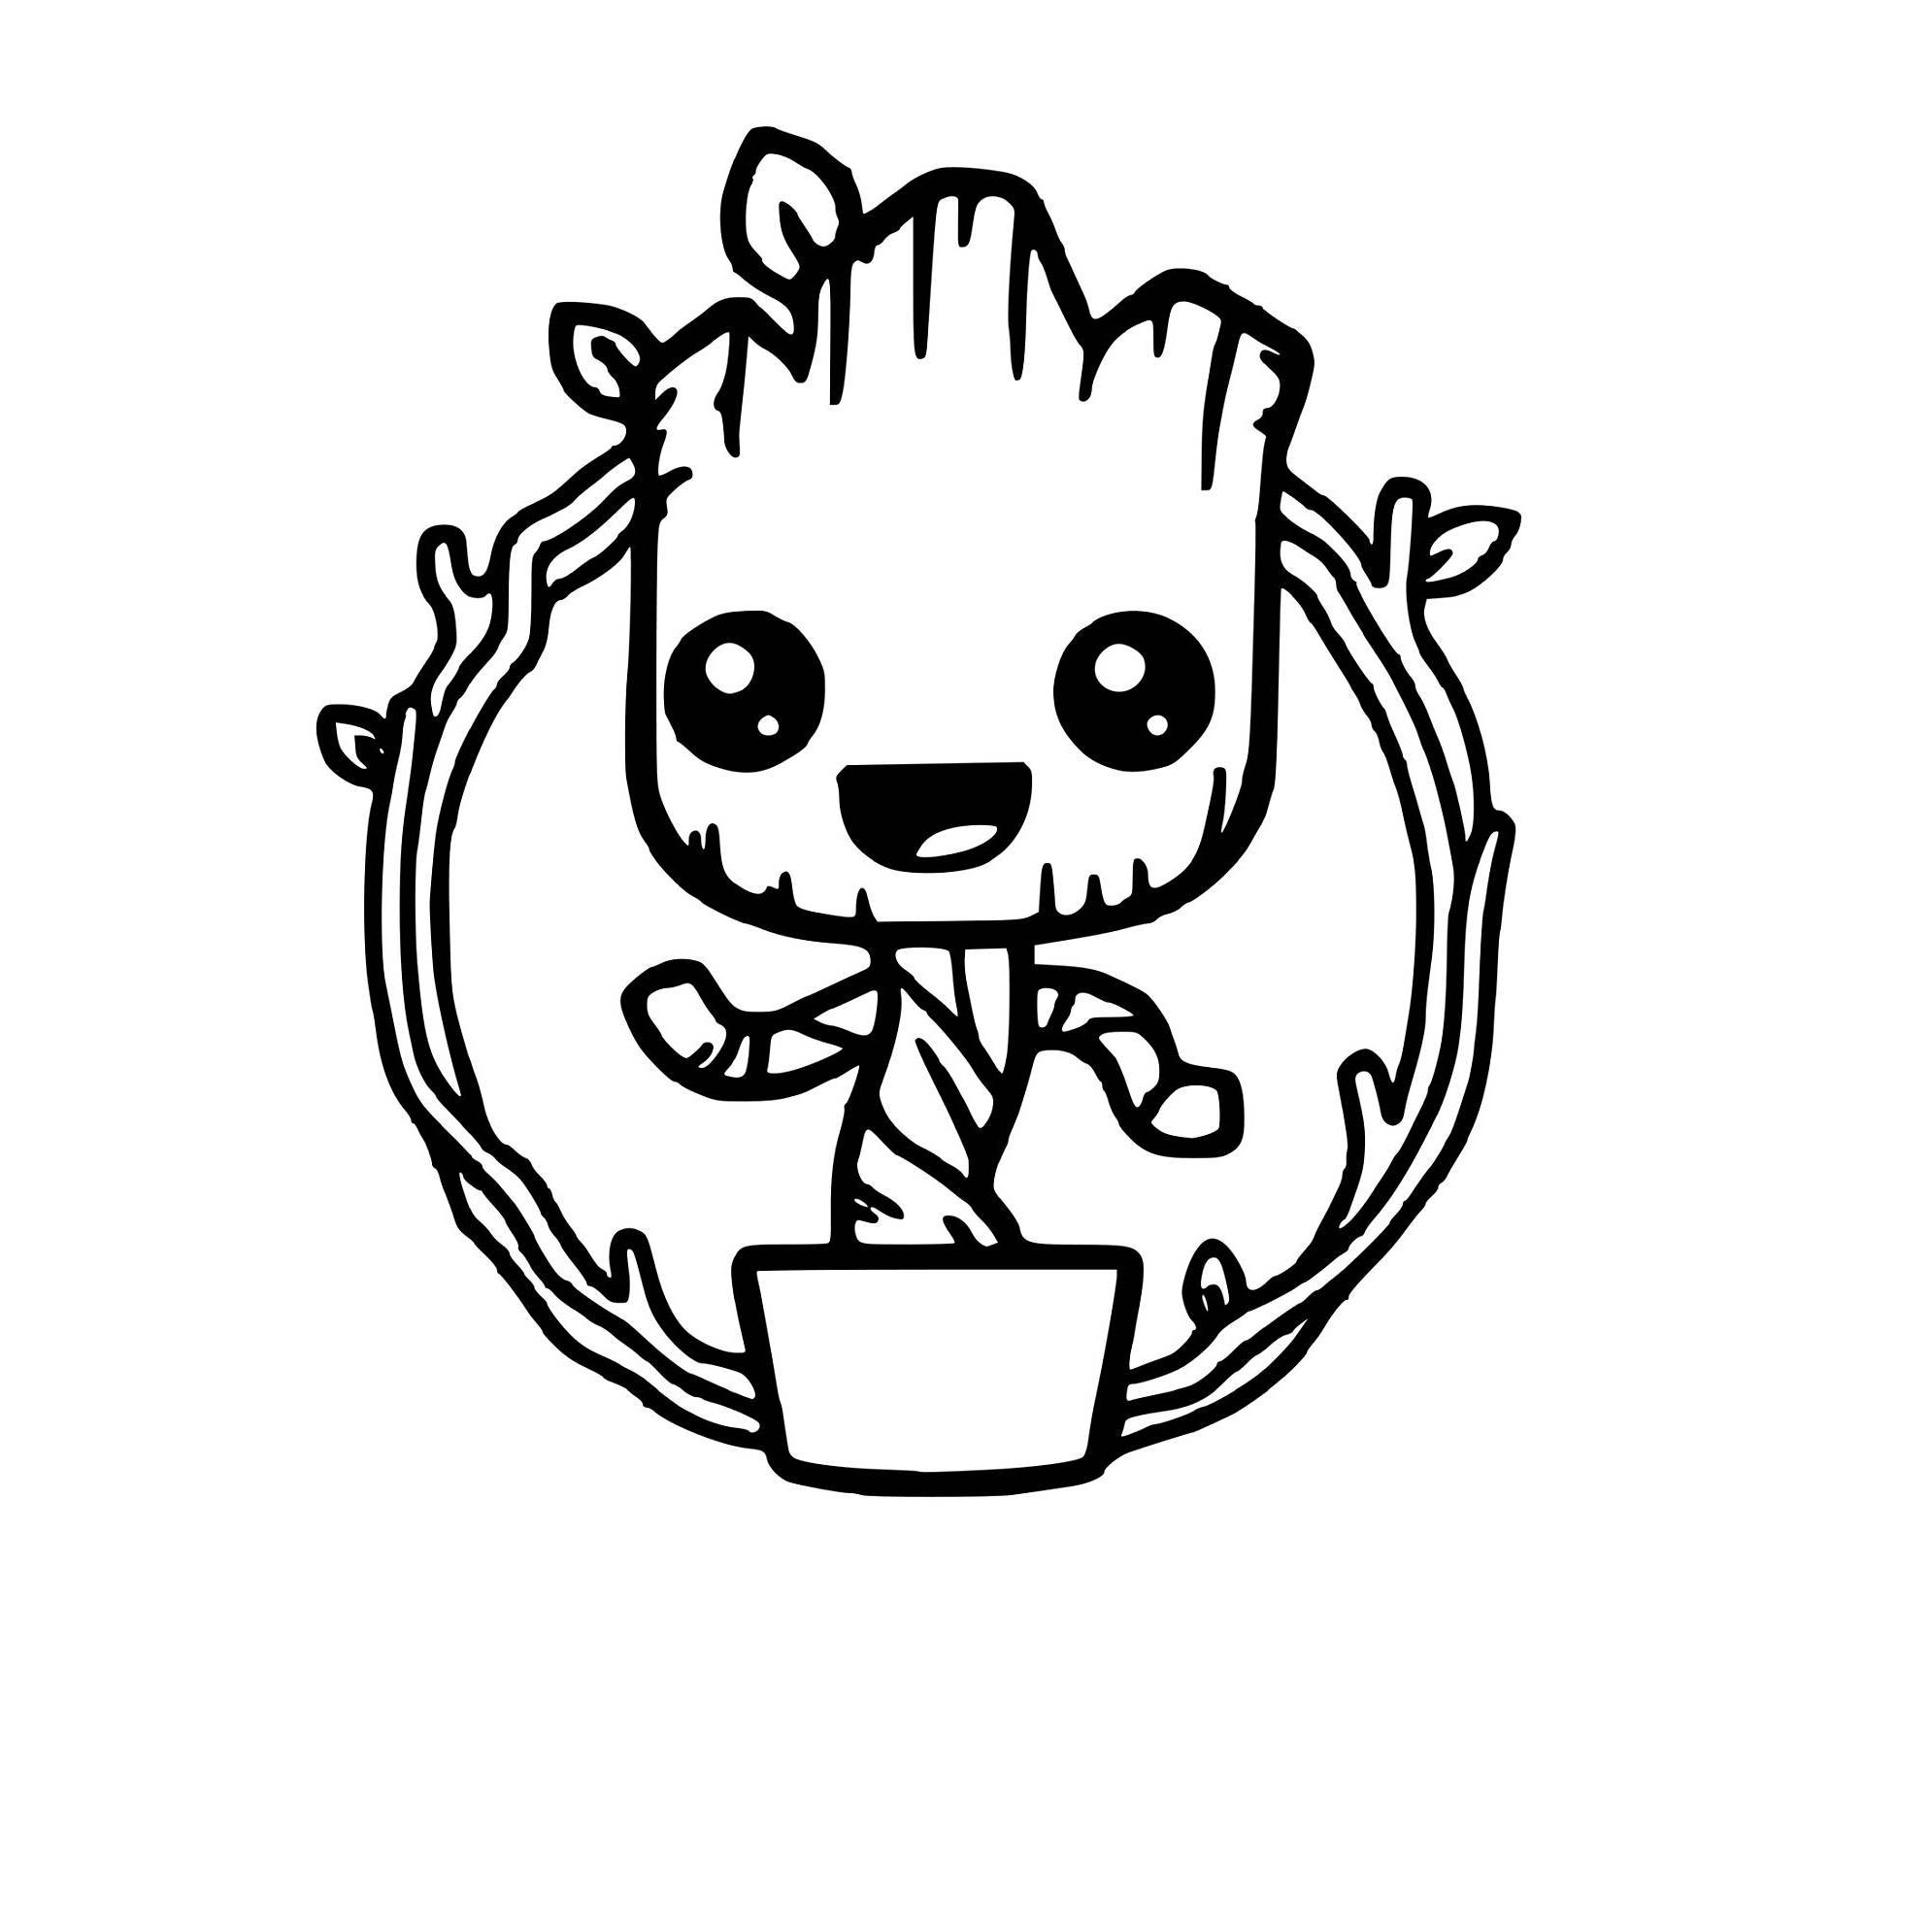 Baby Groot Decal Guardians of the Galaxy Decal Marvel